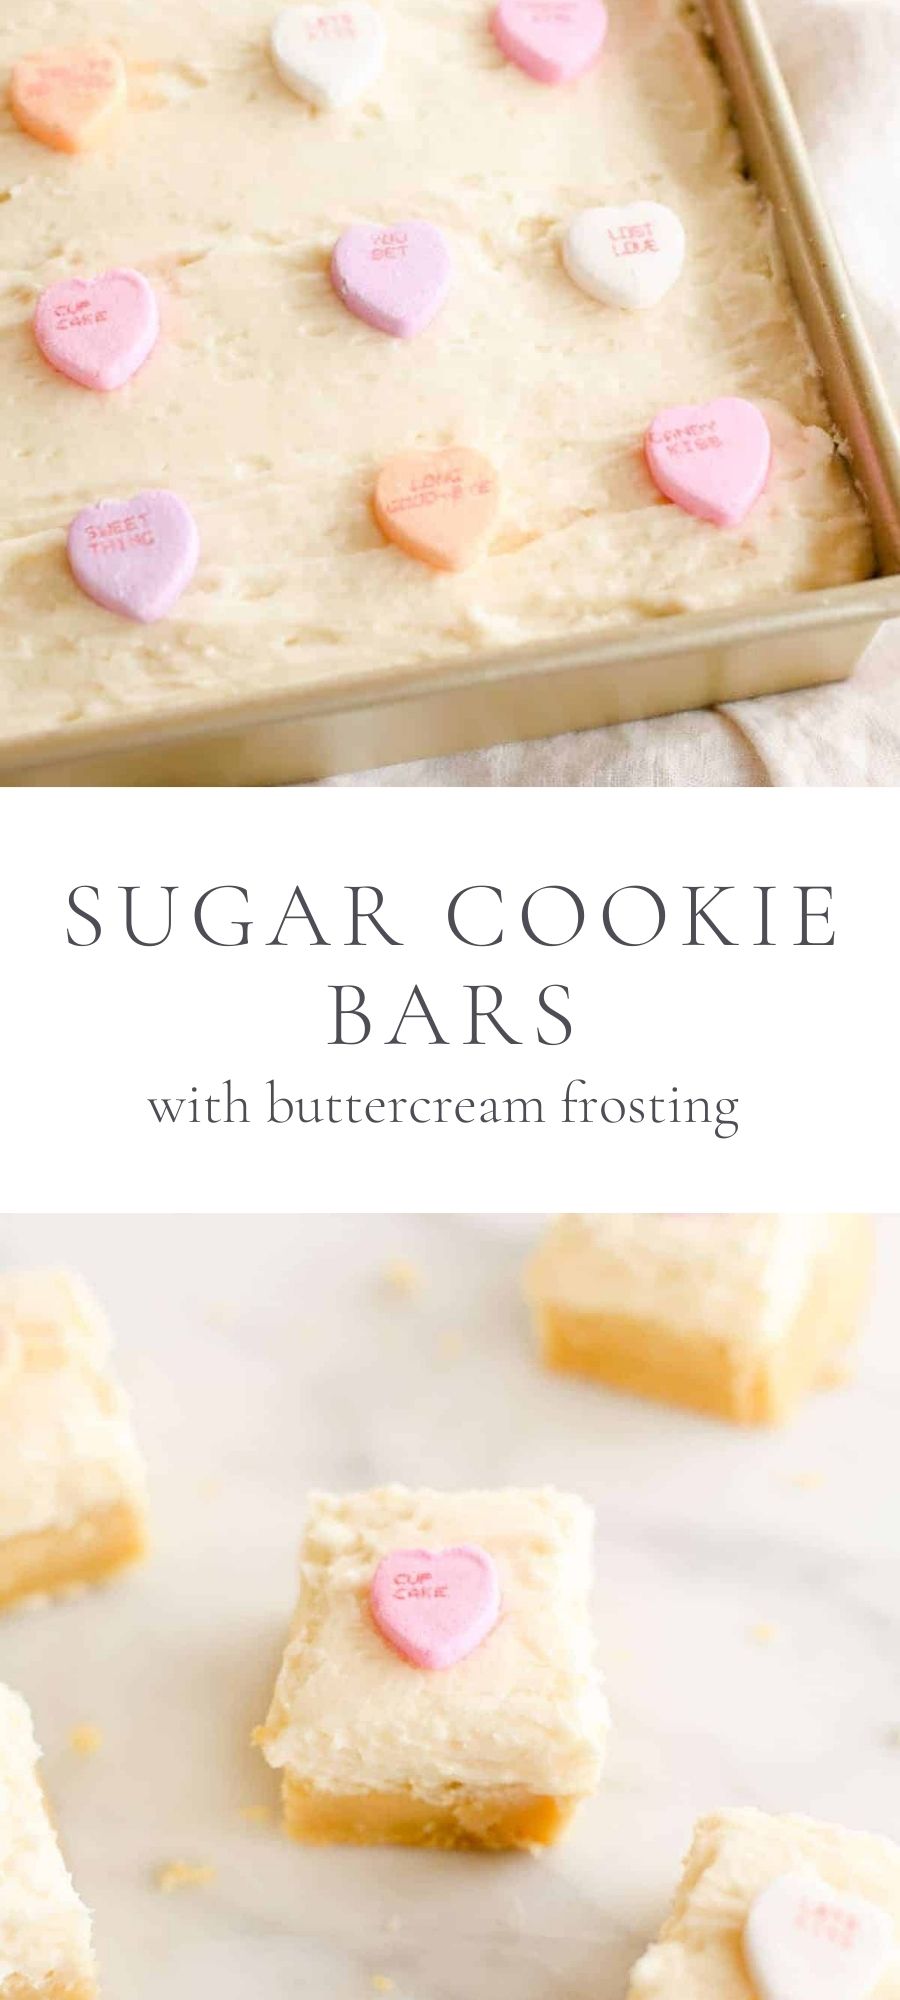 Sugar cookie bars in a pan and cut into bars